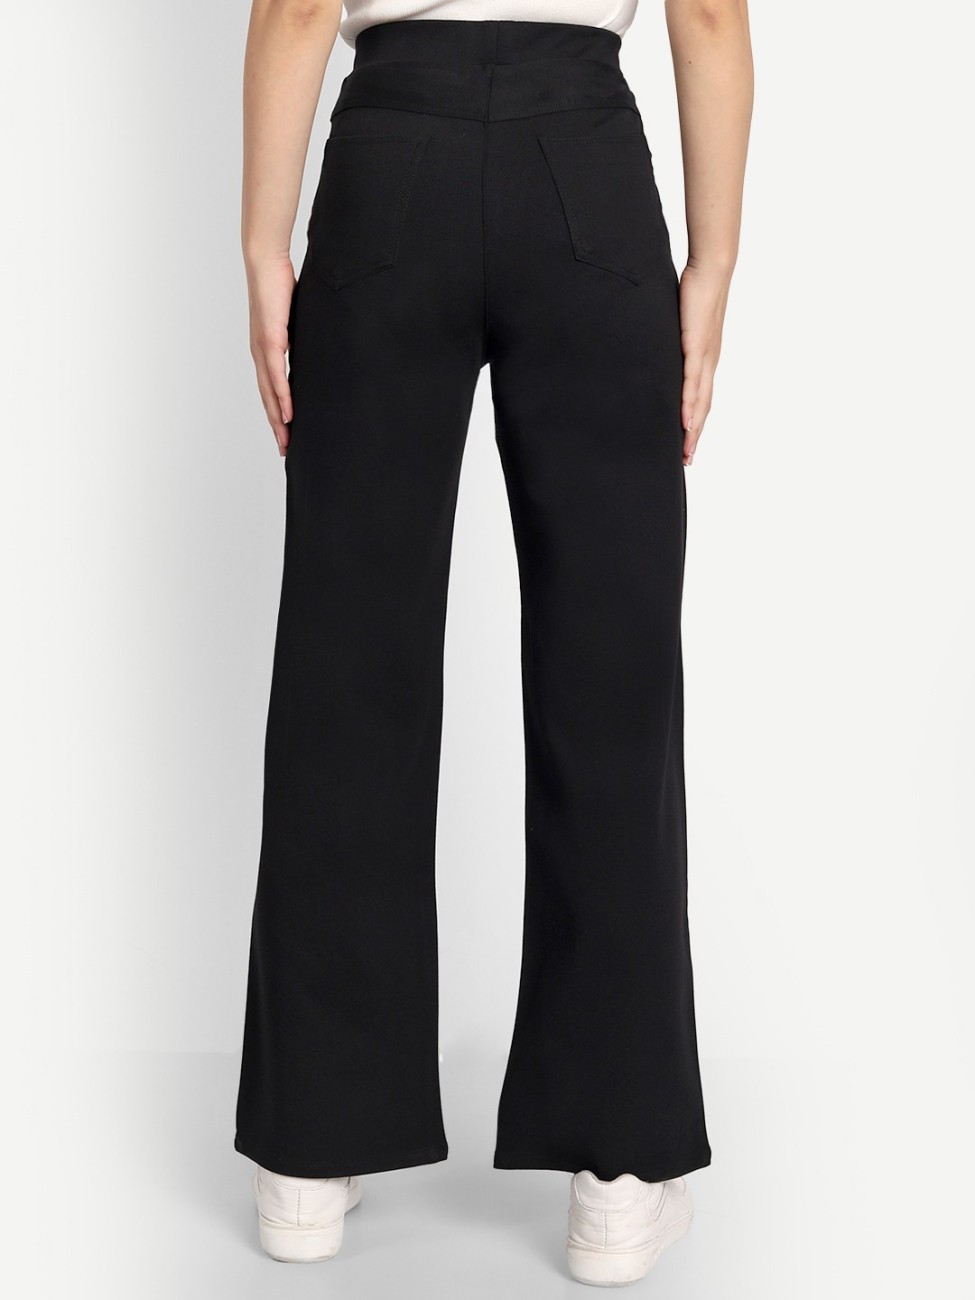 NEXT ONE Relaxed Women Black Trousers - Buy NEXT ONE Relaxed Women Black  Trousers Online at Best Prices in India